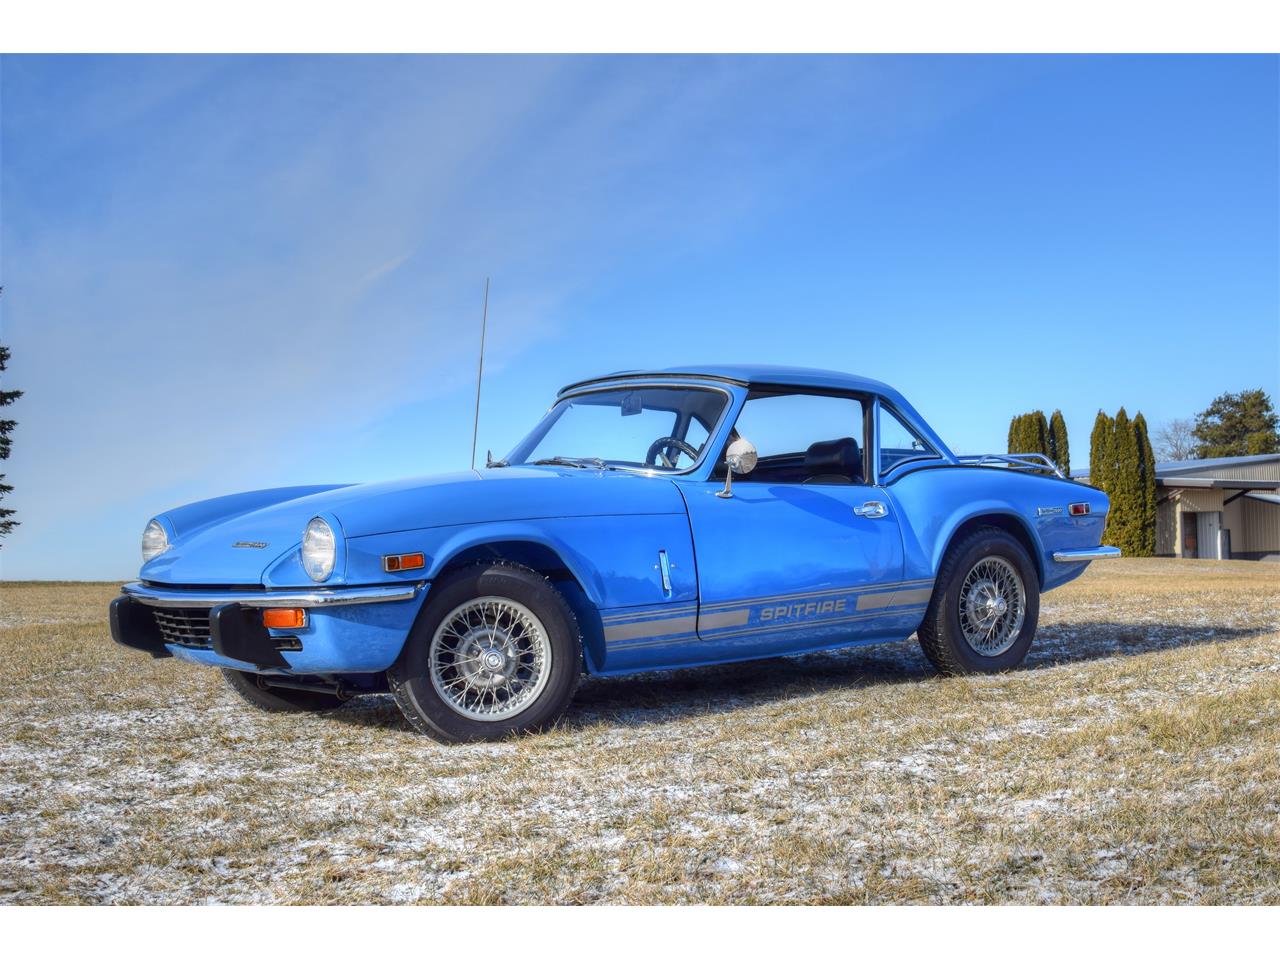 1973 Triumph Spitfire for sale in Watertown, MN